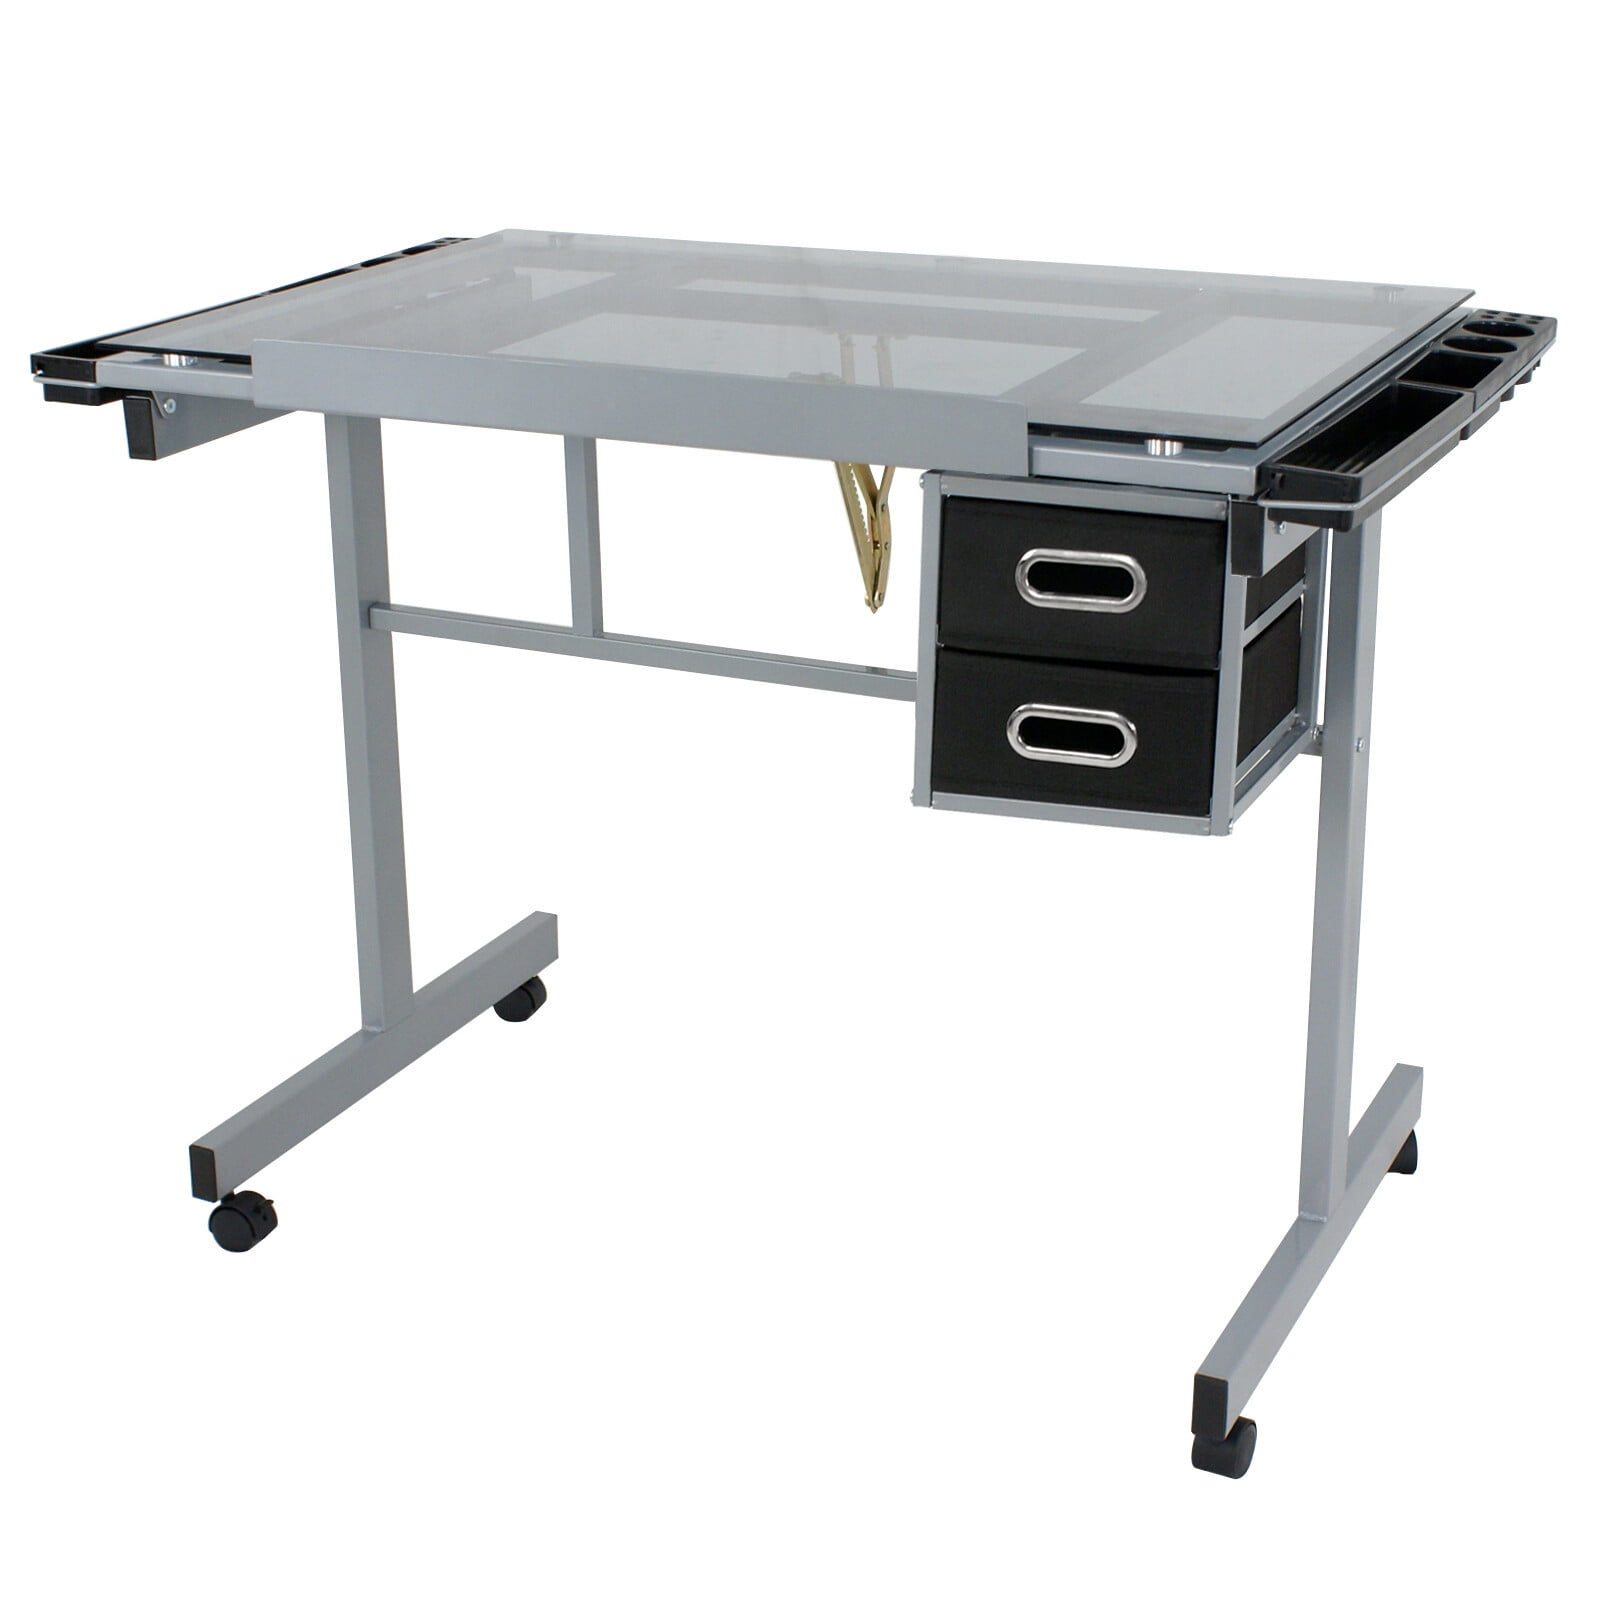 ZENY Drafting Table Craft with Glass Top Drawing Desk Art Work Station -